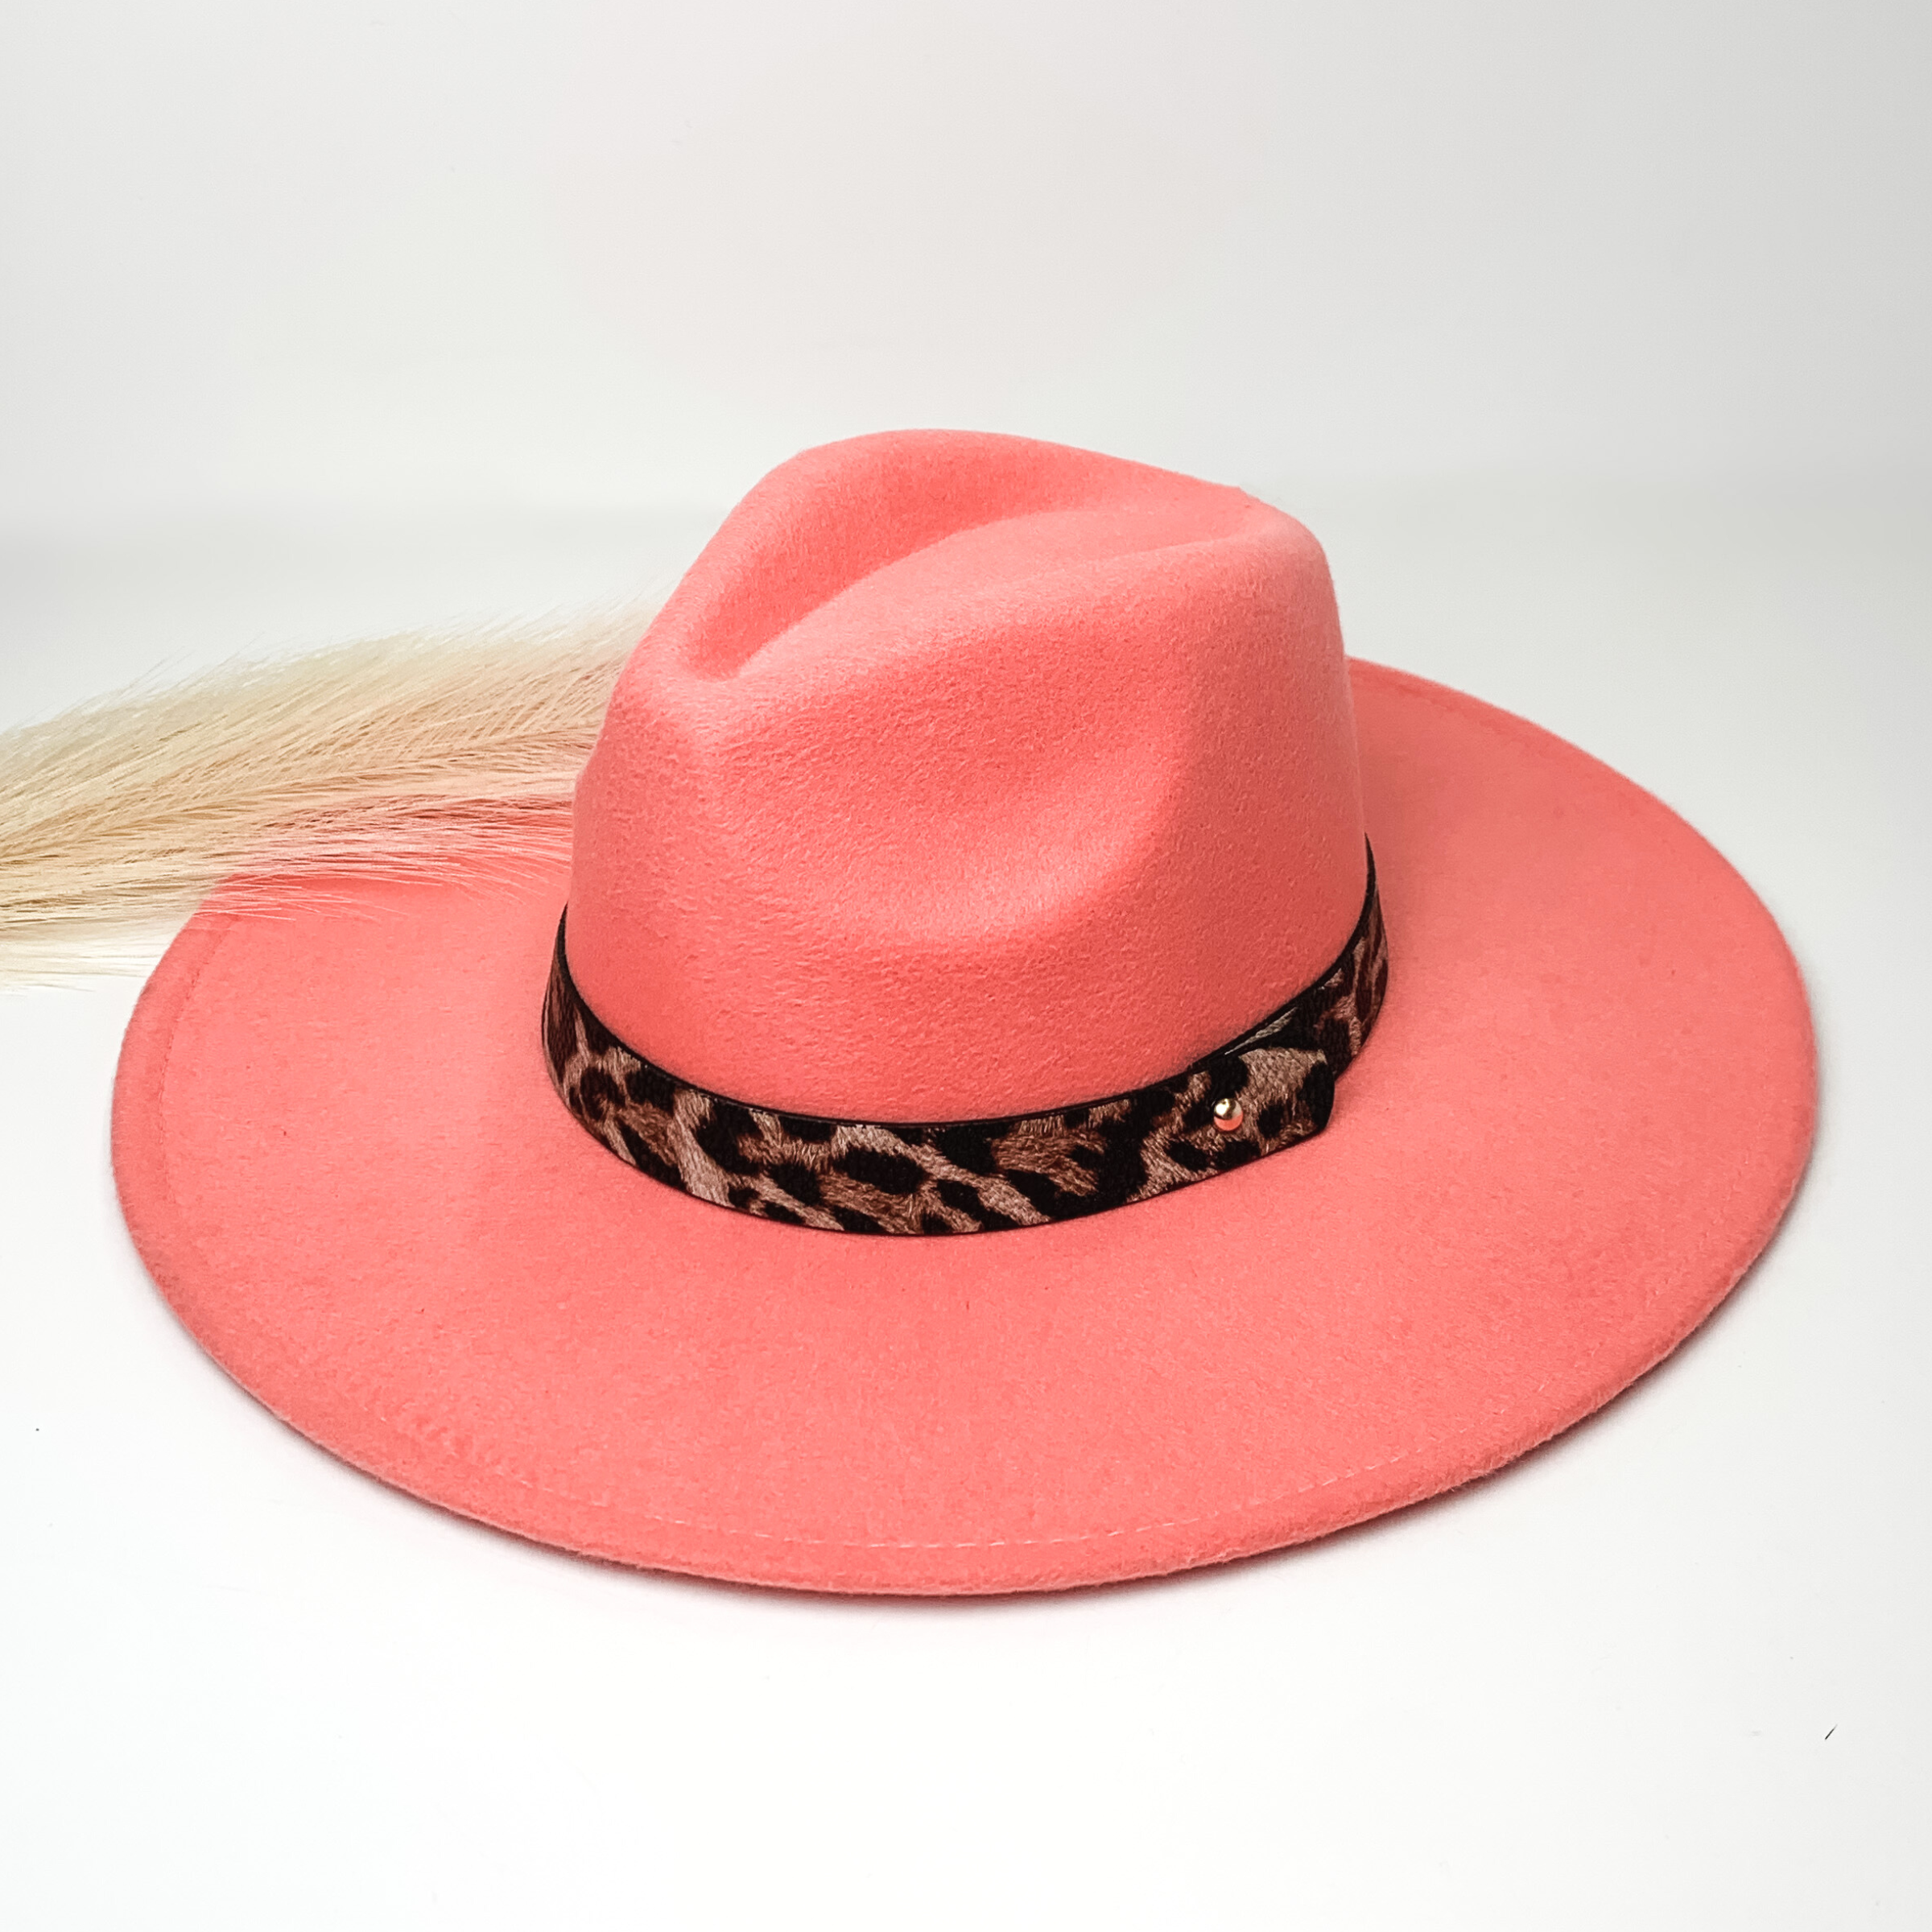 Coral flat brim hat with a leopard print hat bad around the crown. This hat is pictured on a white background with ivory pompous grass laying partially on the brim.